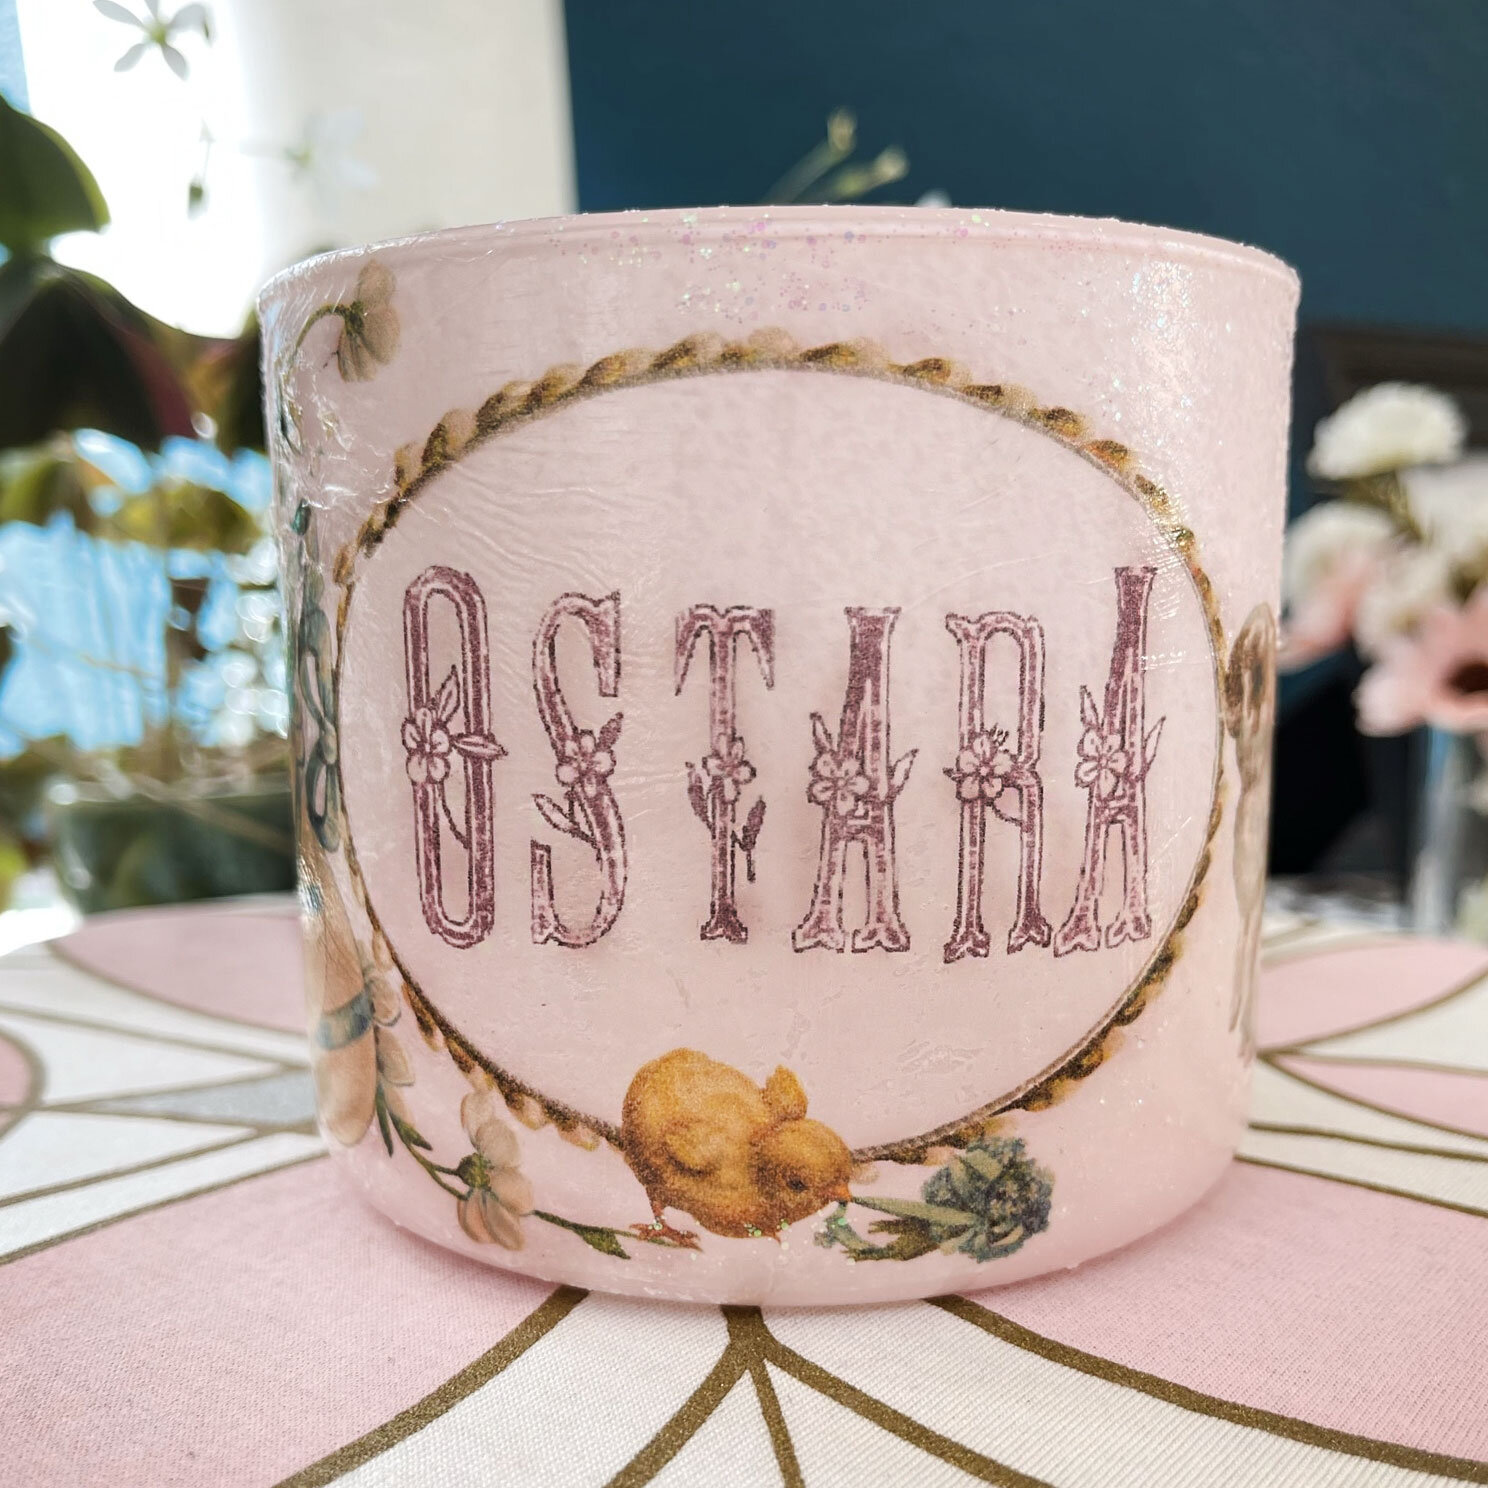 Some words that correspond with Ostara and spring are:
Rebirth
Renew
Refresh
Rejuvenate. 
These words apply perfectly to this DIY craft, as it all starts with upcycling an empty used candle jar and decoupaging onto it to renew it and give it a new pu